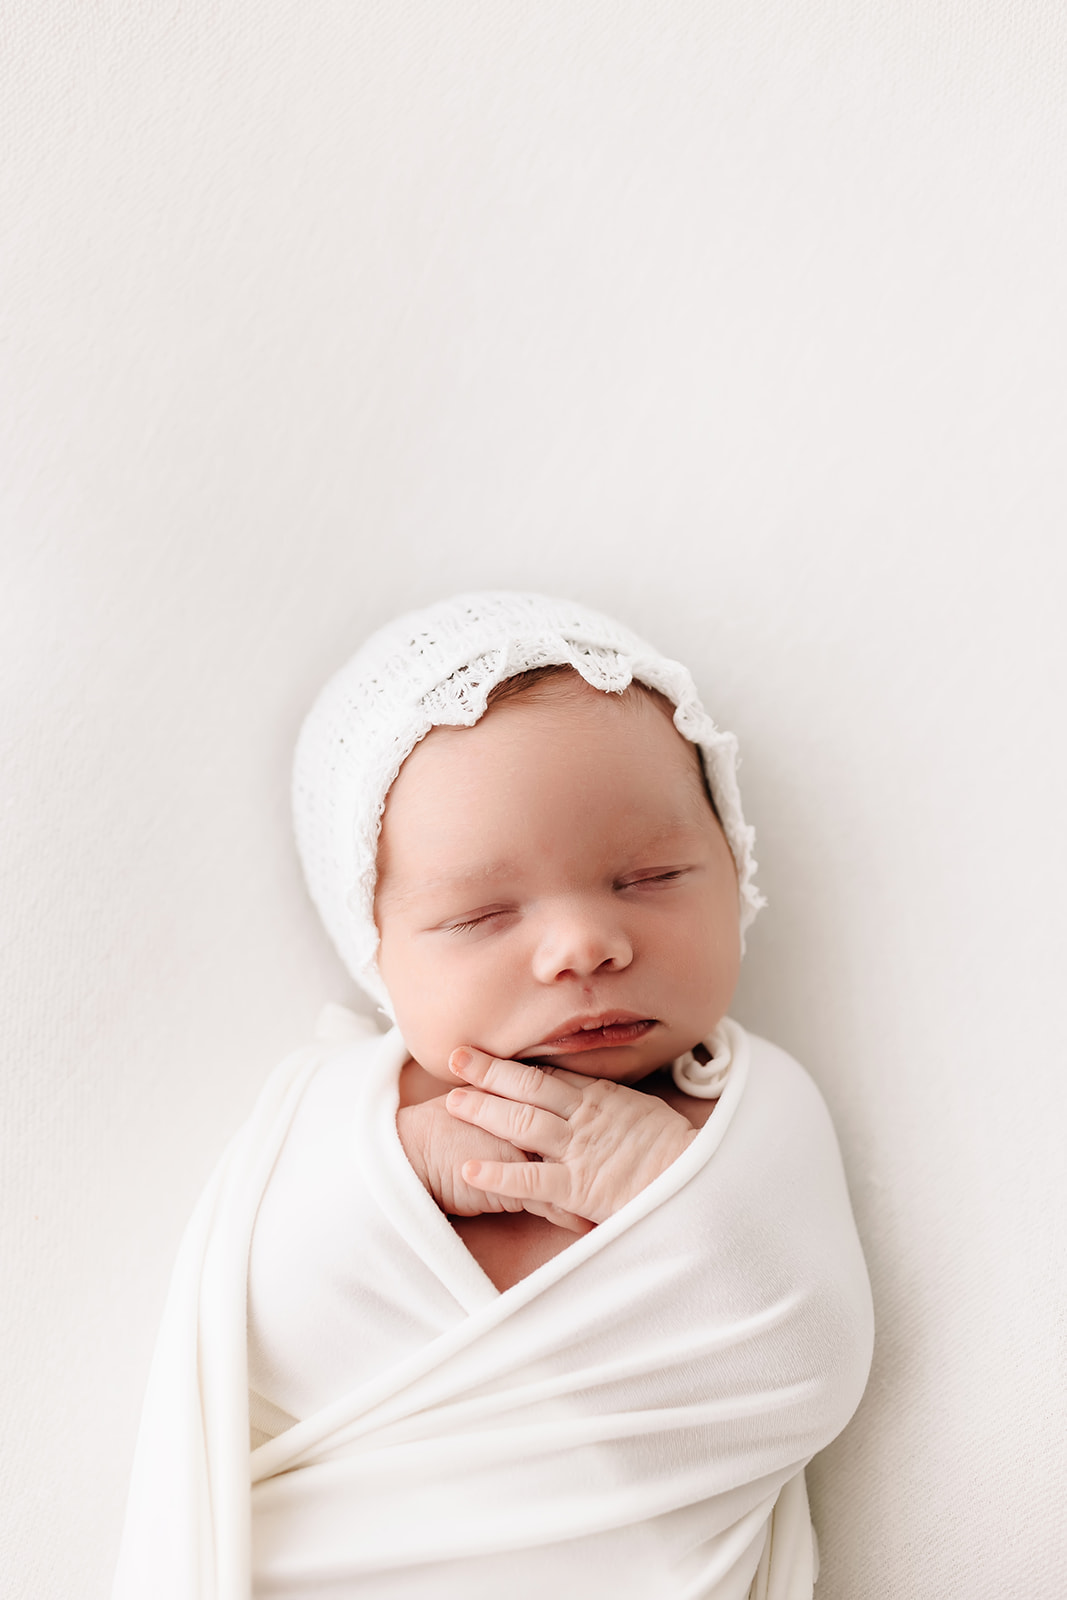 A newborn baby sleeps on its back with hands out in a white knit bonnet